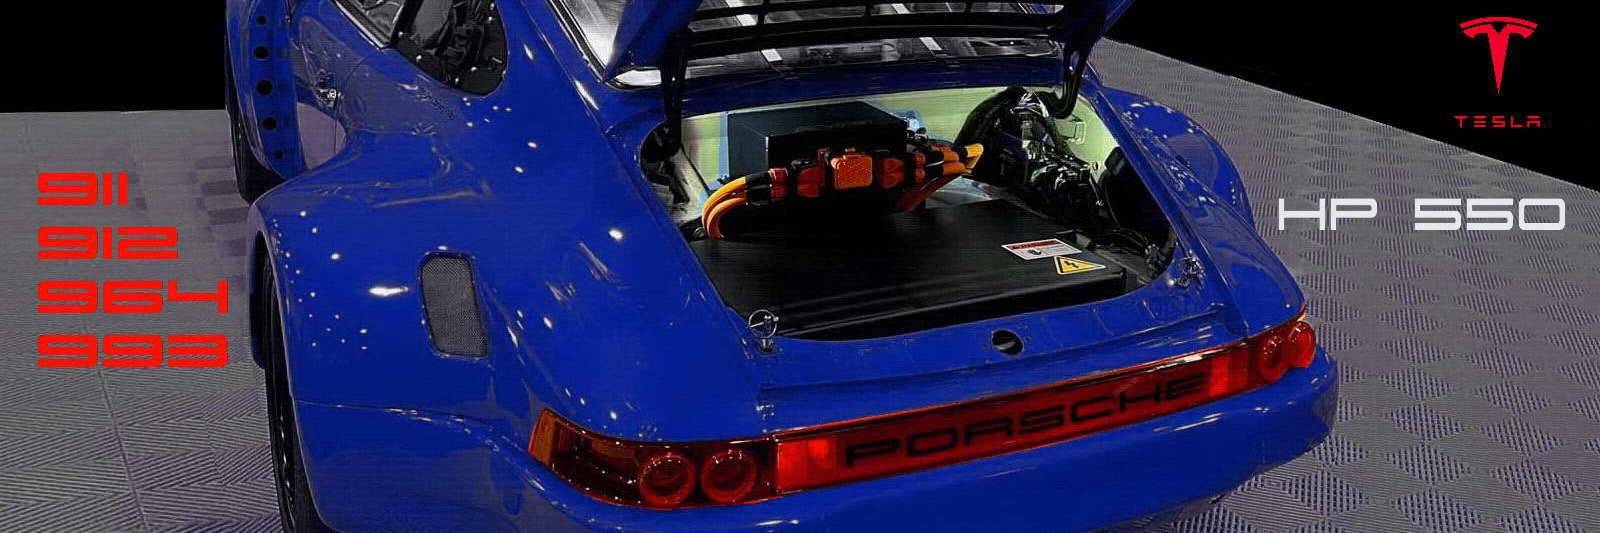 Electric-Porsche-911-tail banner tagged